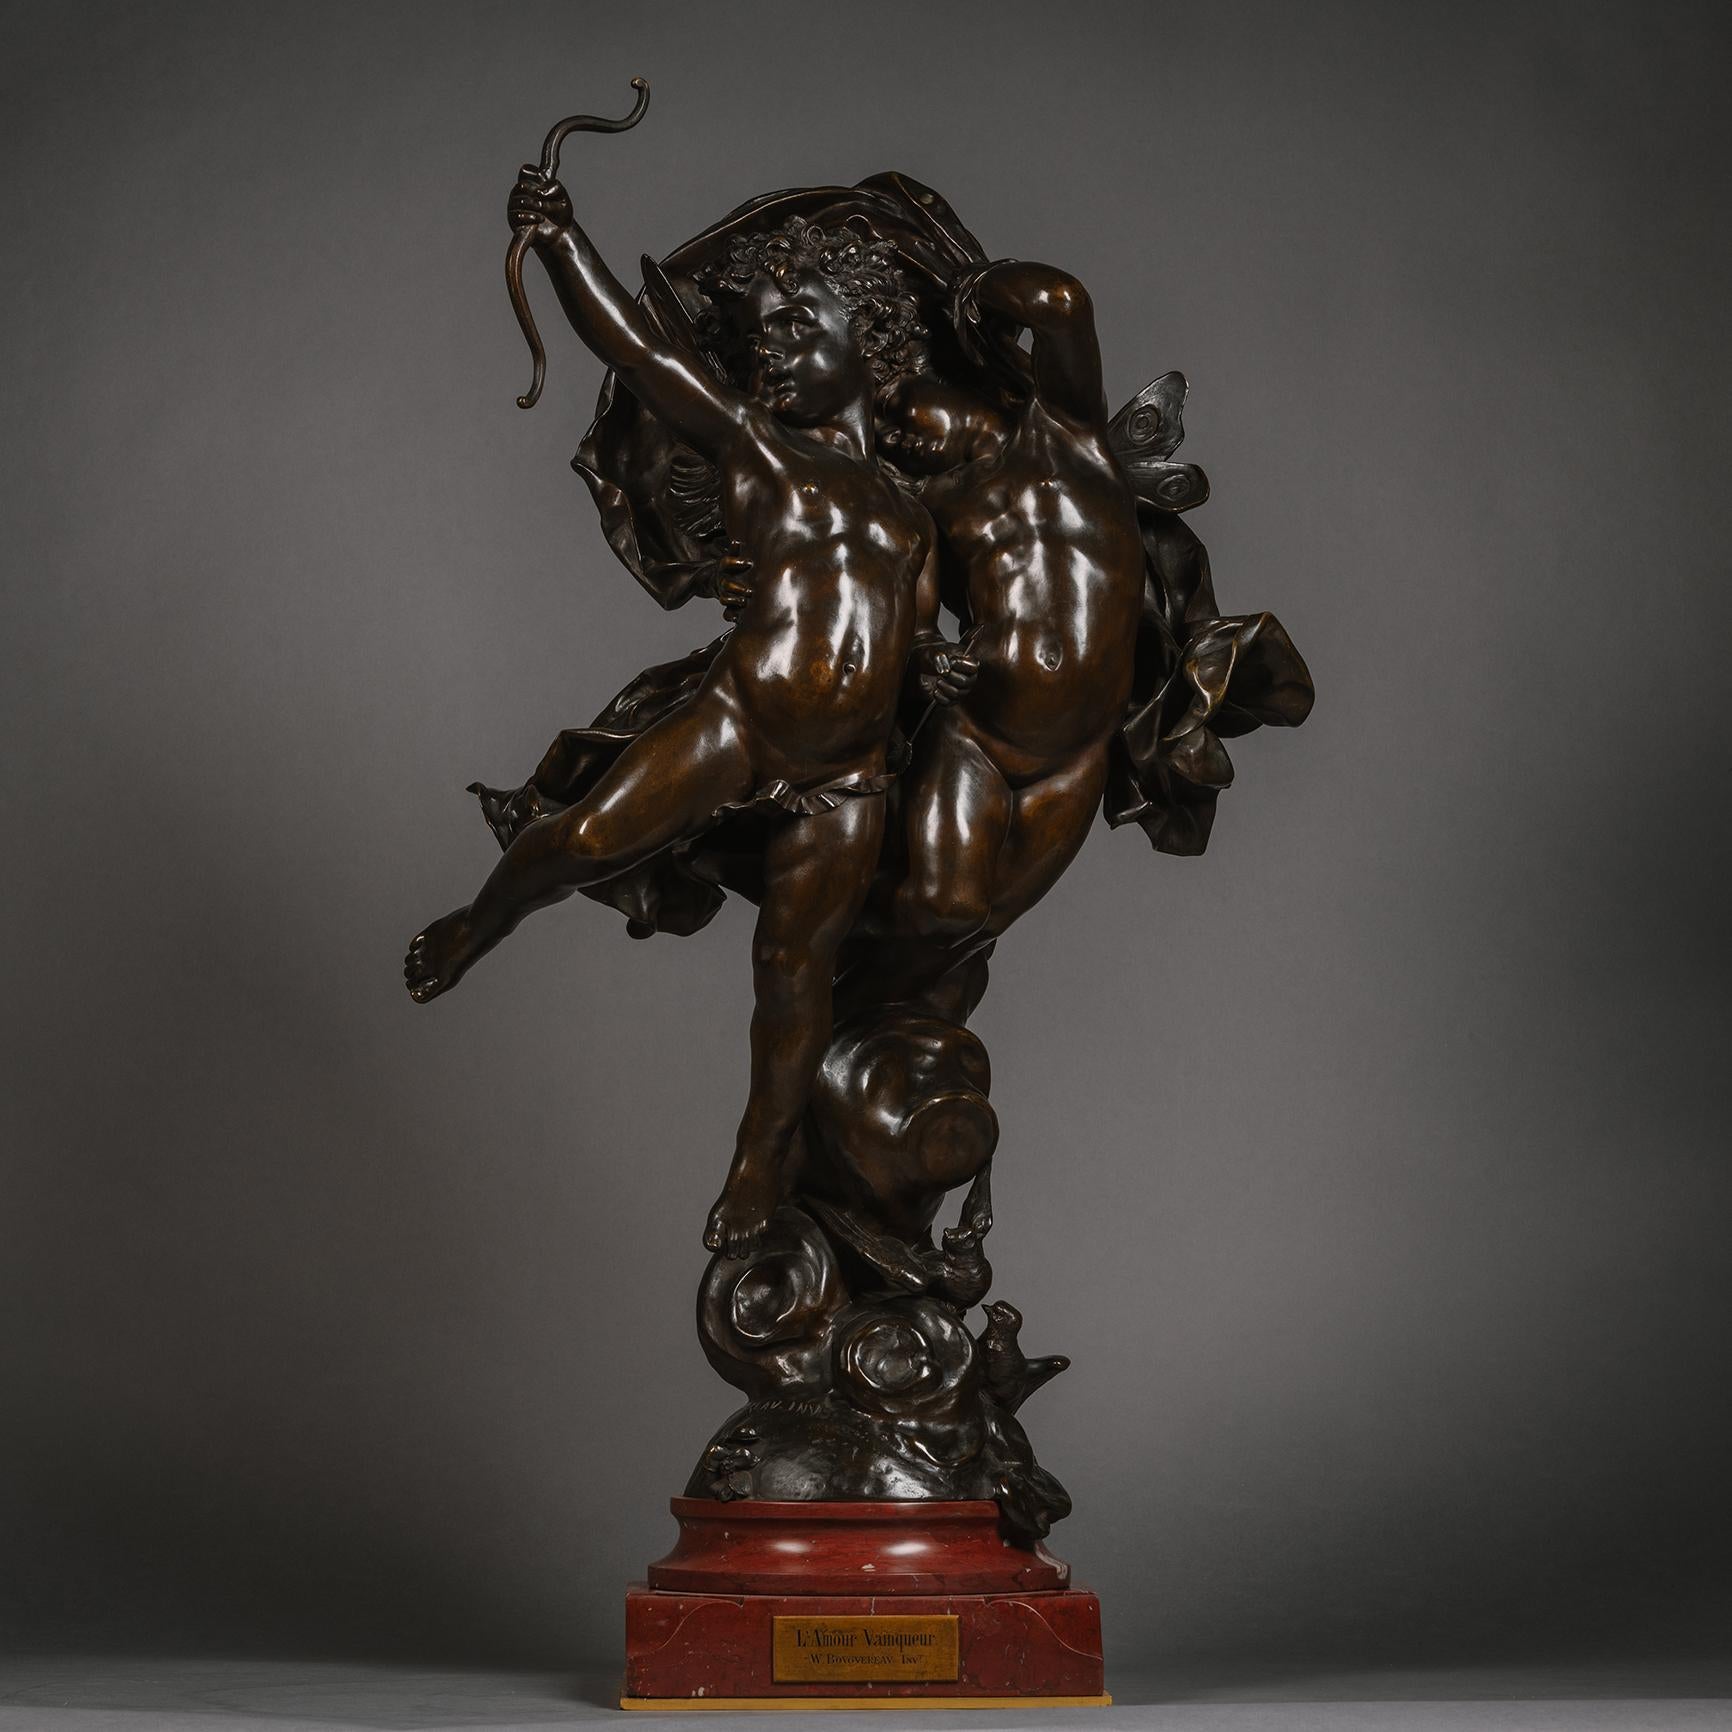 A Fine Patinated Bronze Figural Group of  Cupid and Psyche, Entitled 'L'Amour Vainqueur' ('A Love Vanquished') By Adolphe Itasse (French, 1830 - 1893). 

On a revolving rouge de France marble base.

Signed and dated ‘A. Itasse / Scvpt / 1887’,